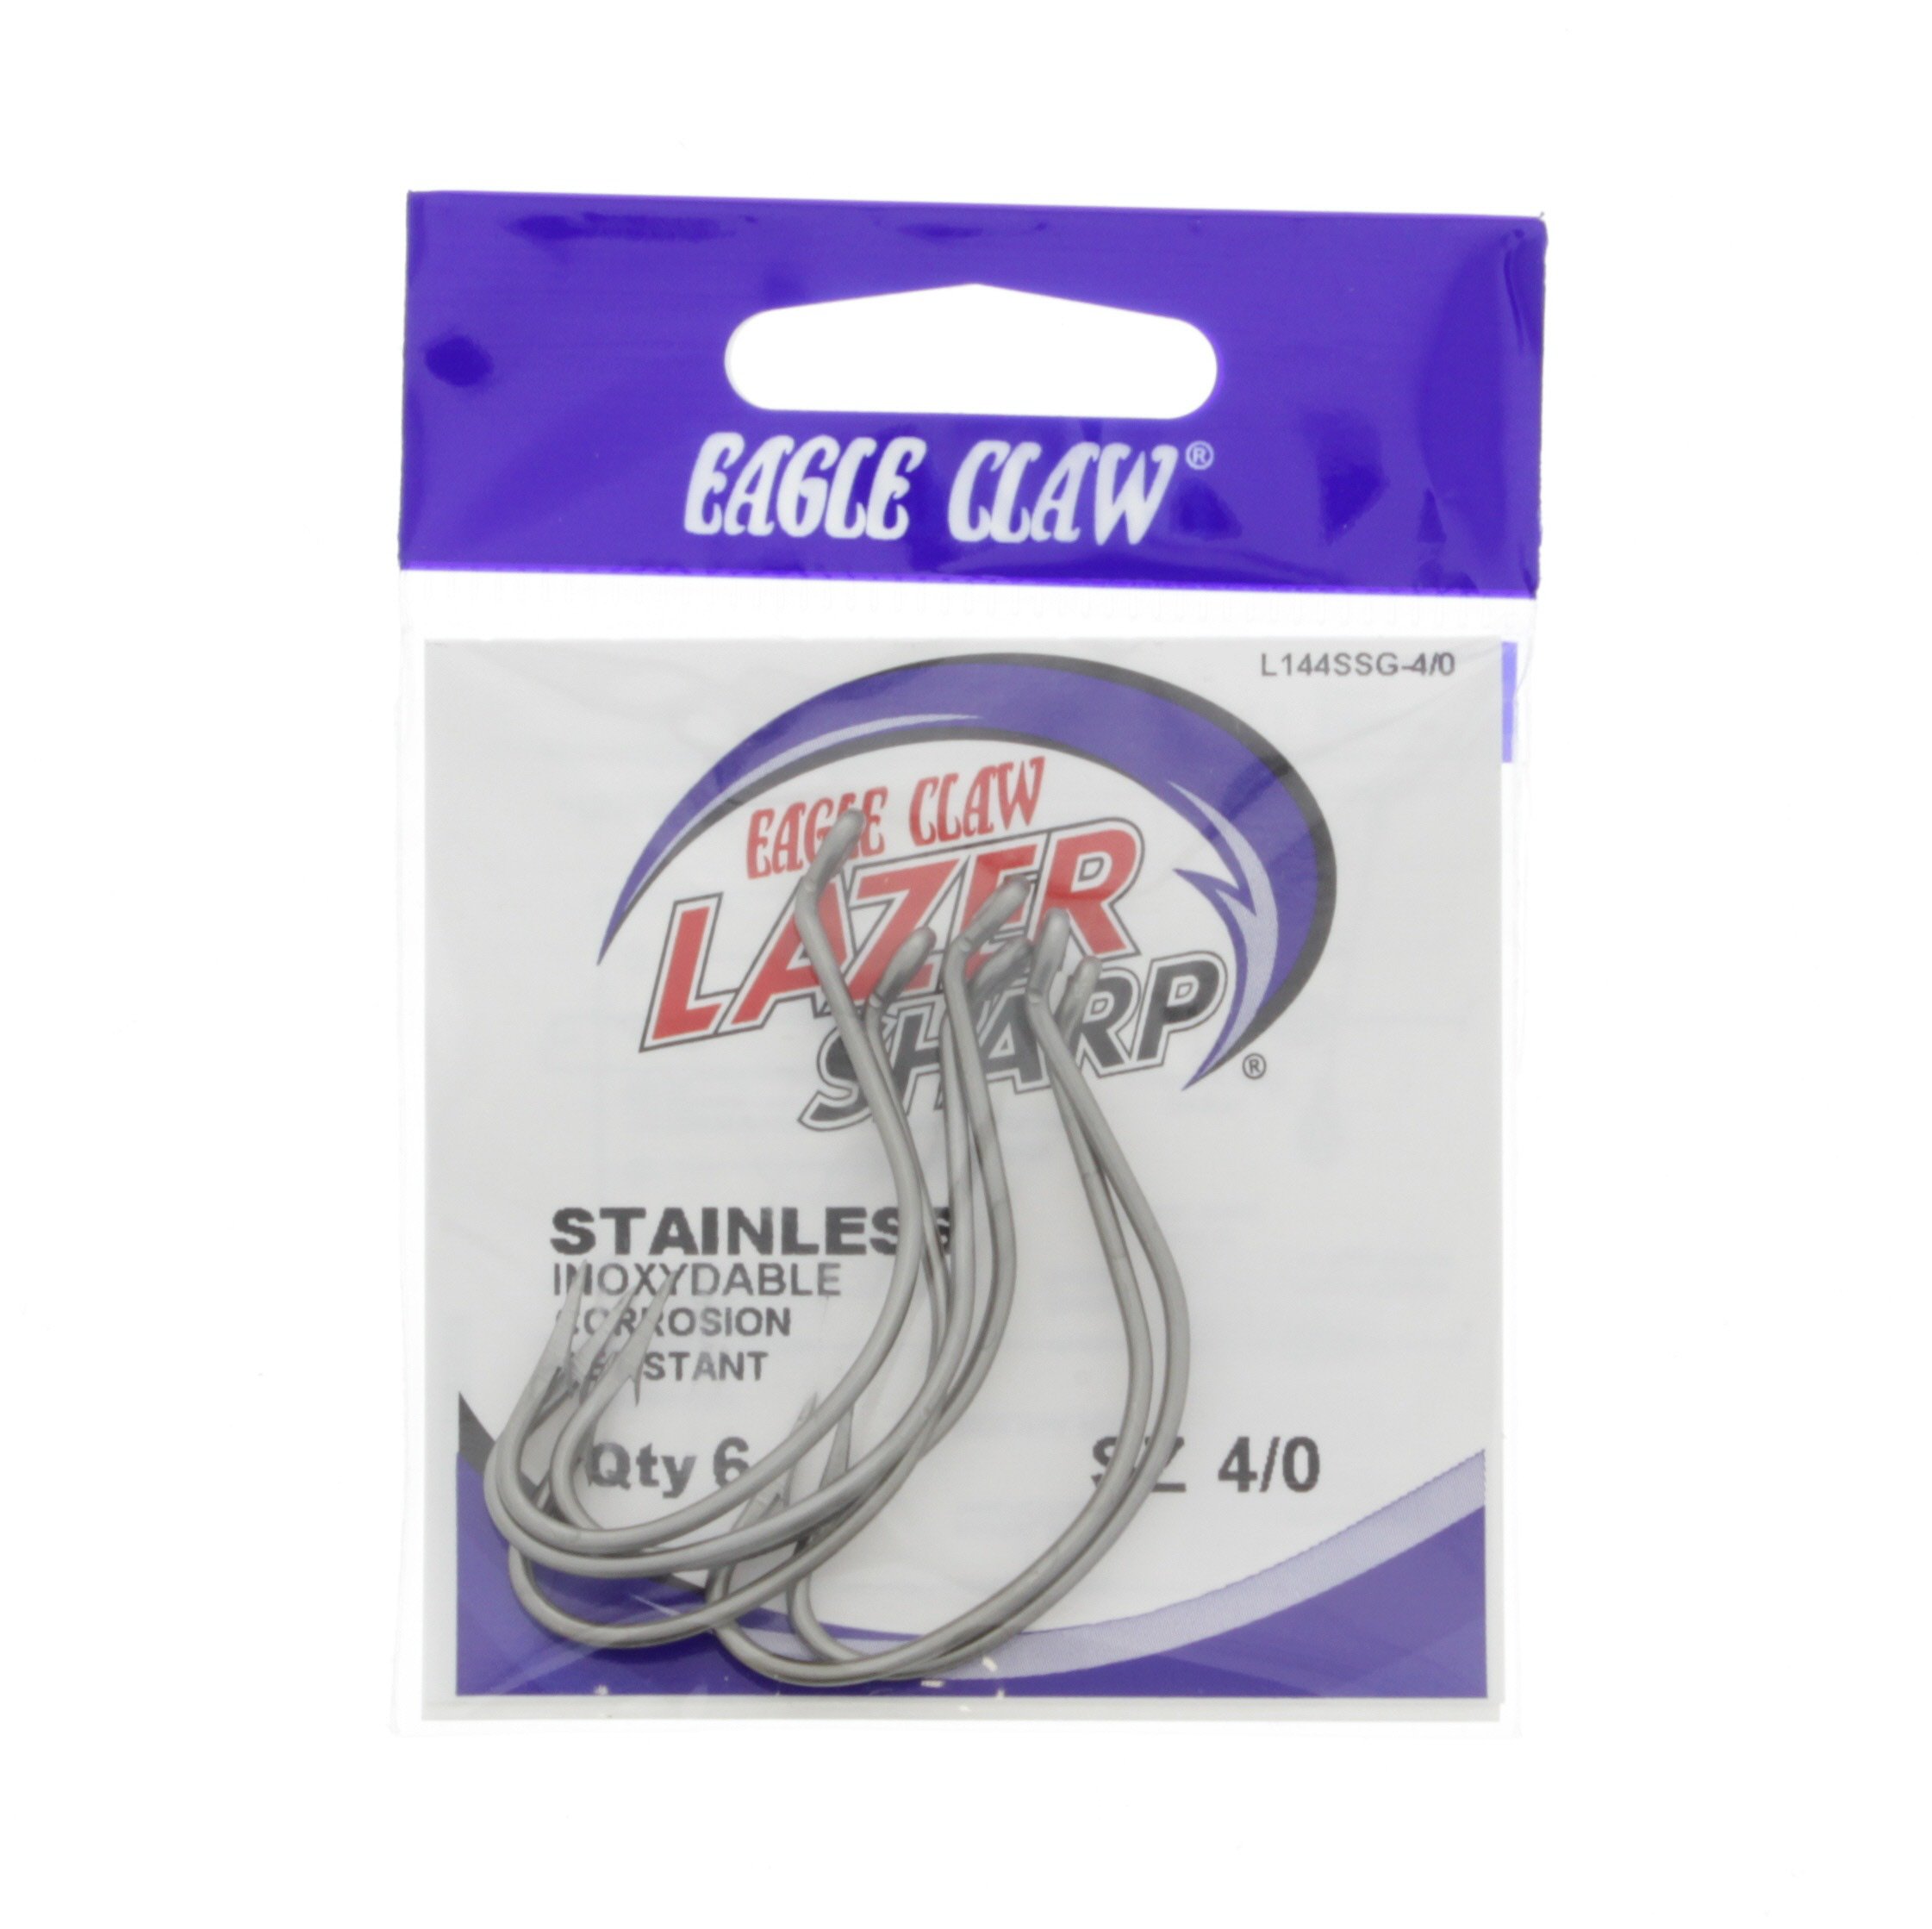 Eagle Claw Lazer Sharp Stainless Hook, Size 4/0 - Shop Fishing at H-E-B